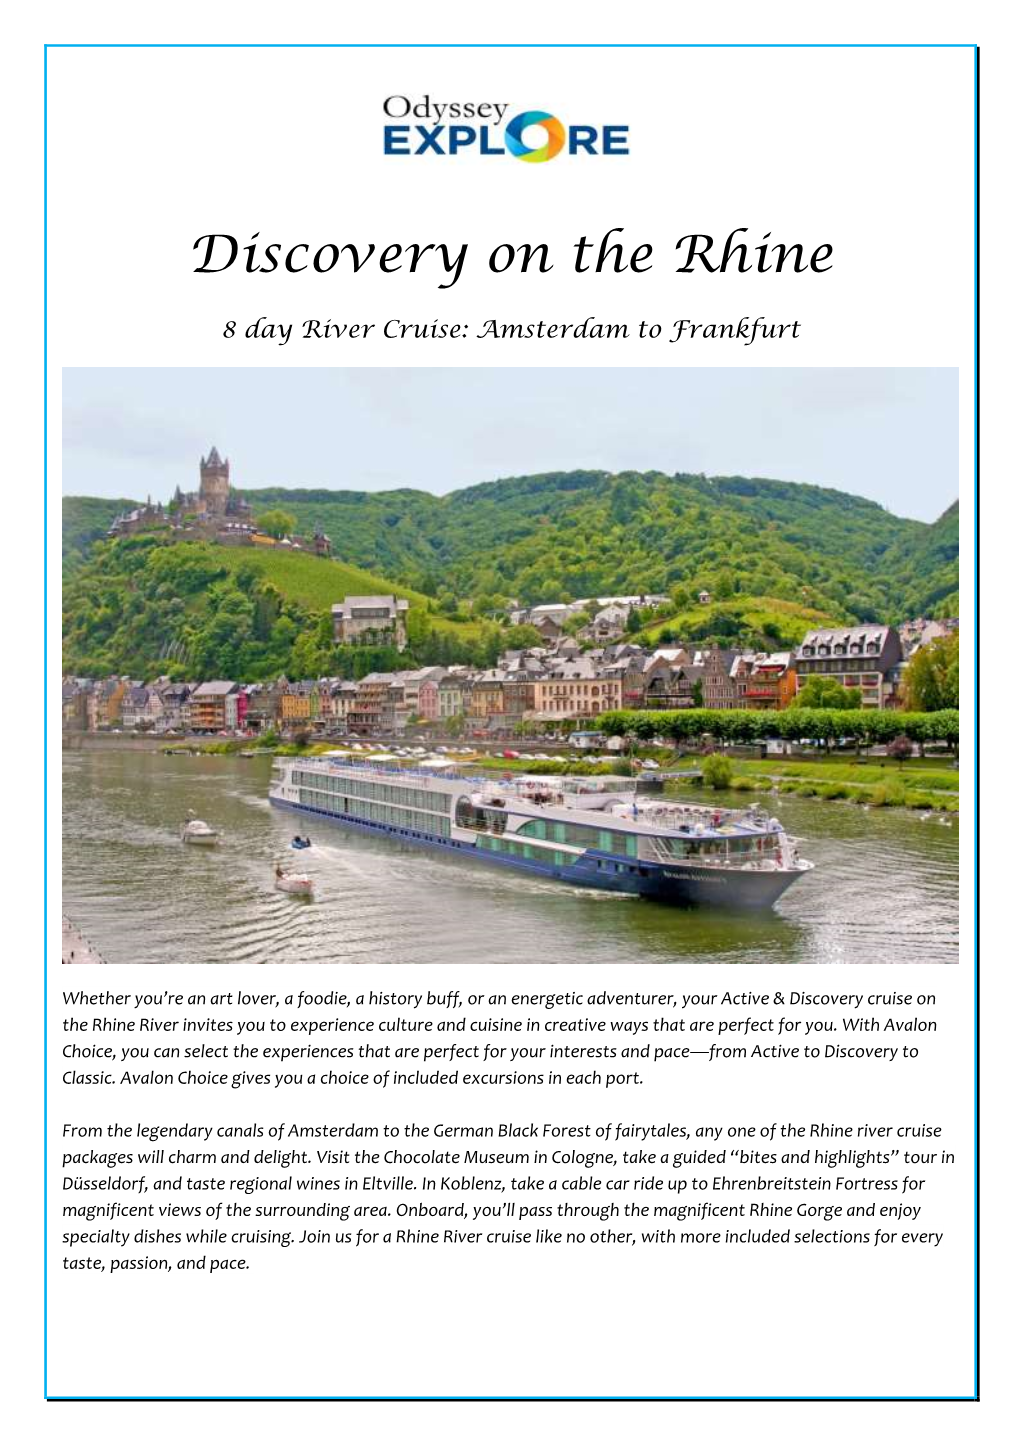 Discovery on the Rhine